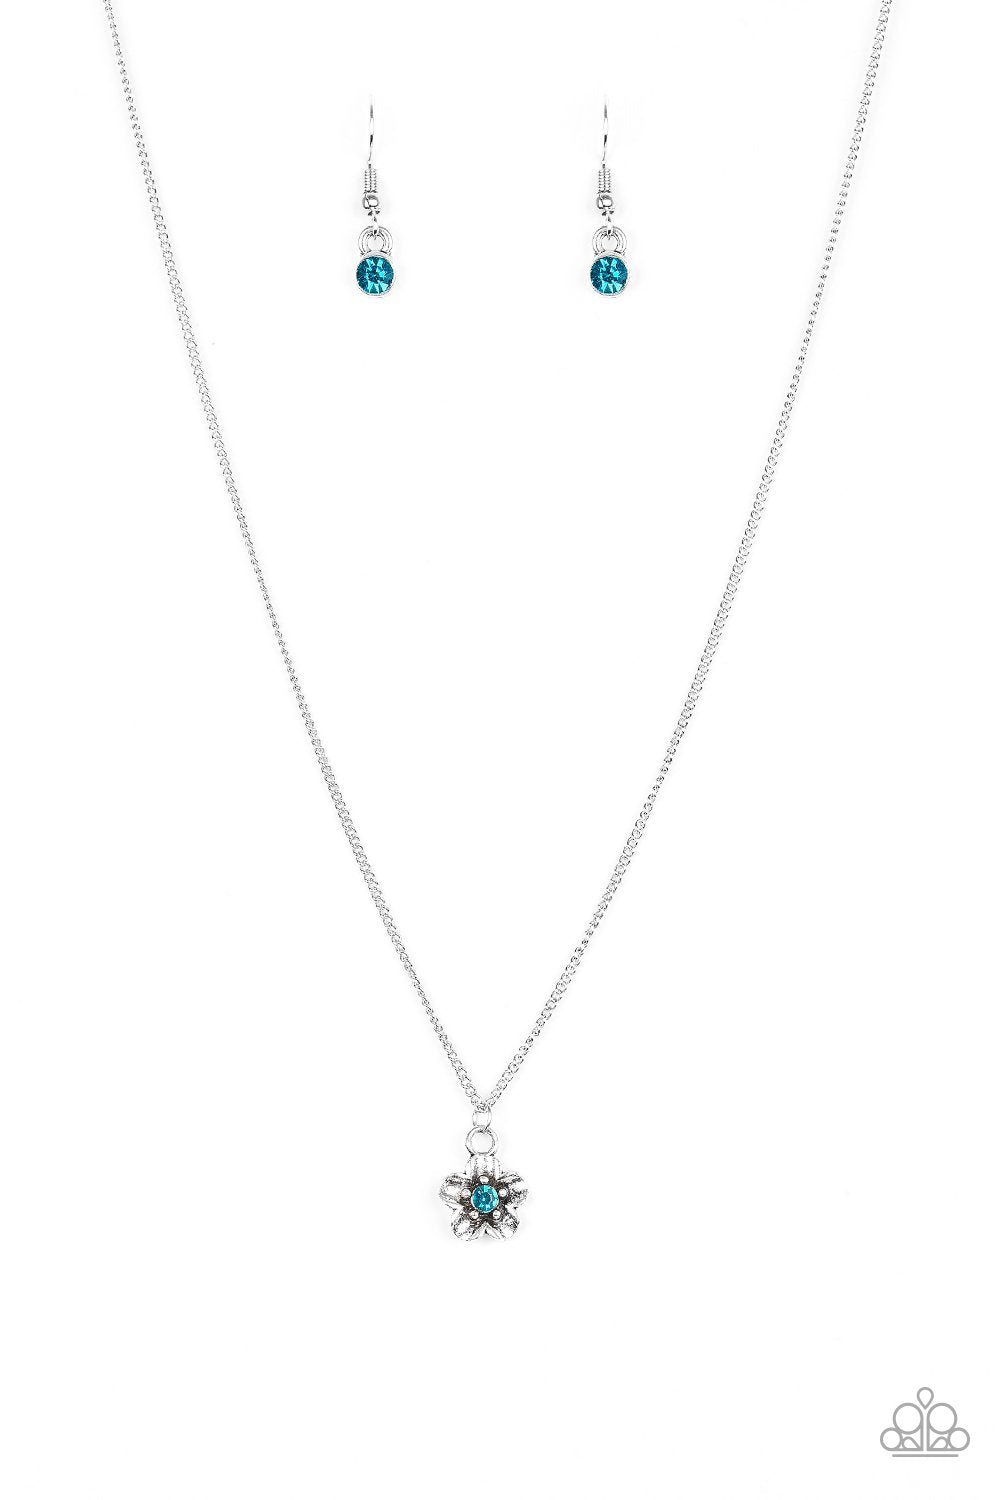 Boho Botanical Silver and Blue Flower Necklace - Paparazzi Accessories-CarasShop.com - $5 Jewelry by Cara Jewels